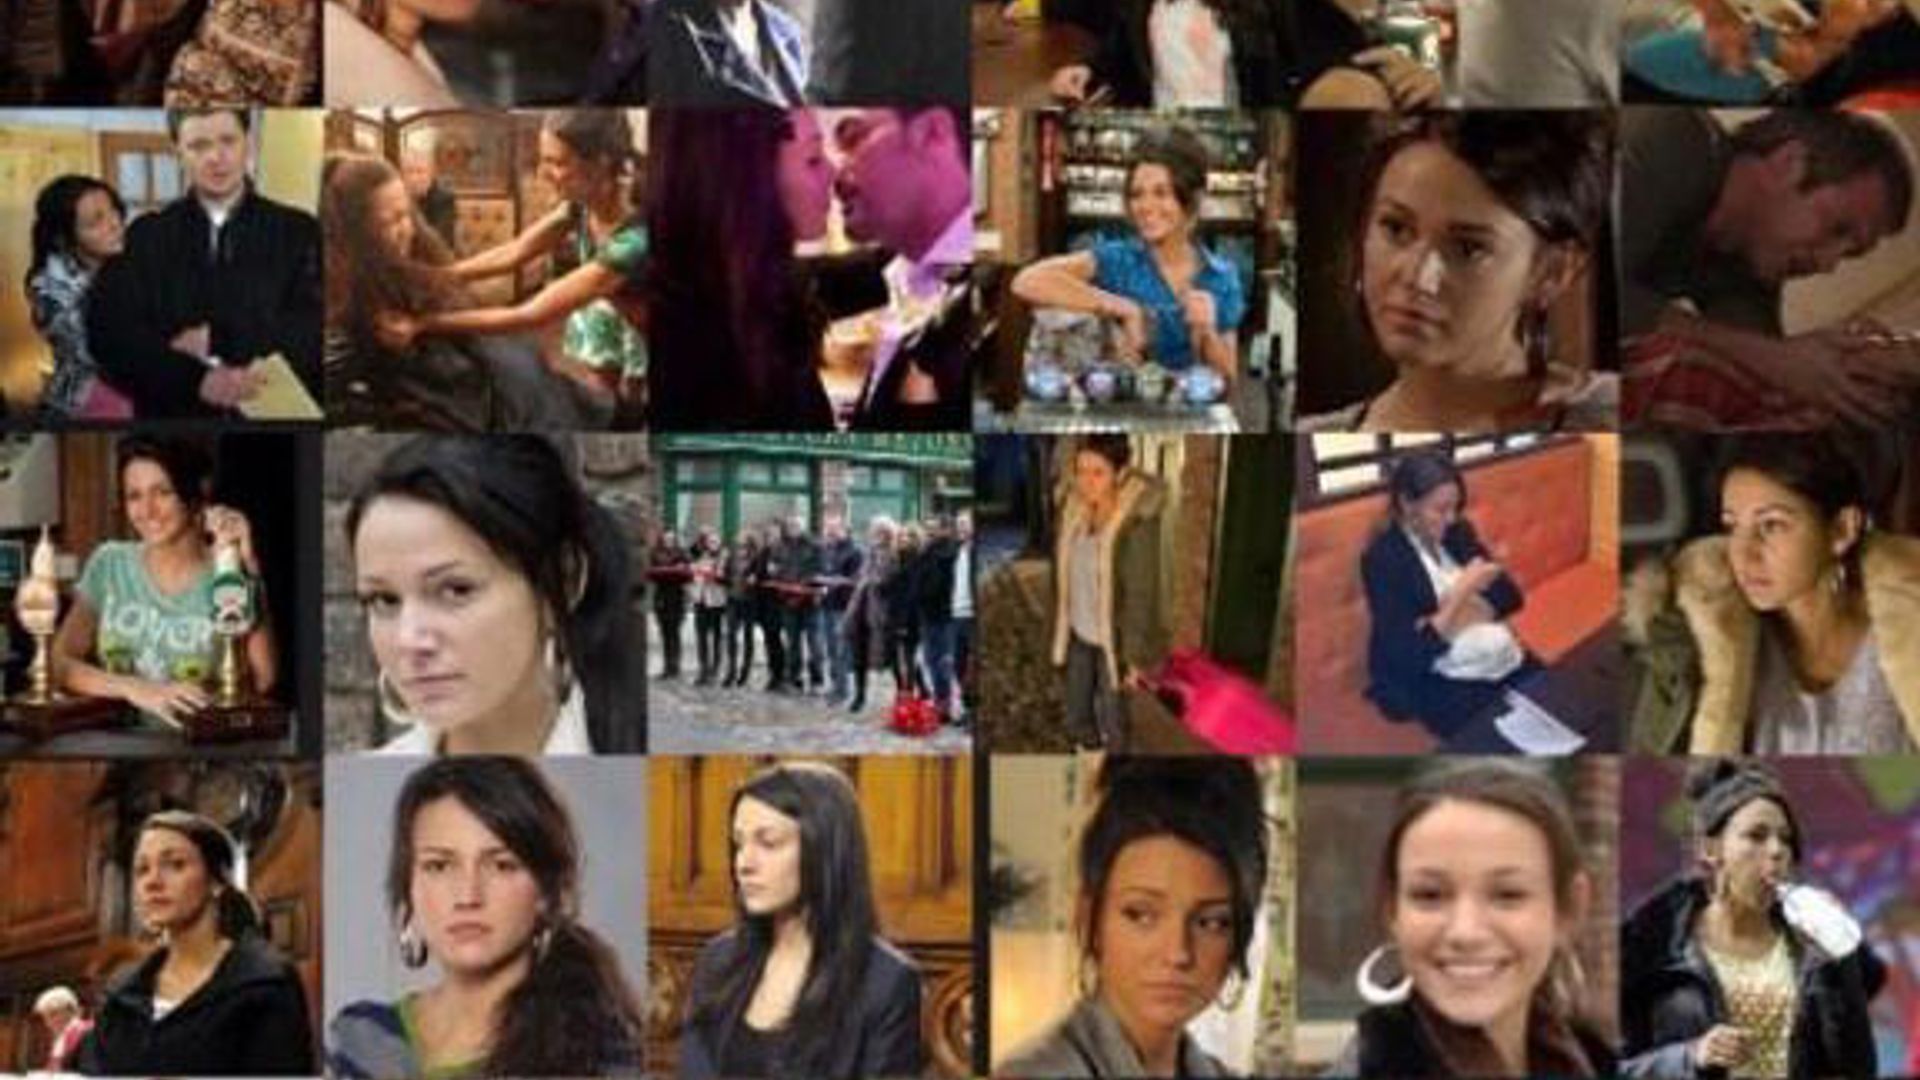 Michelle Keegan pays tribute to her Corrie character Tina McIntyre